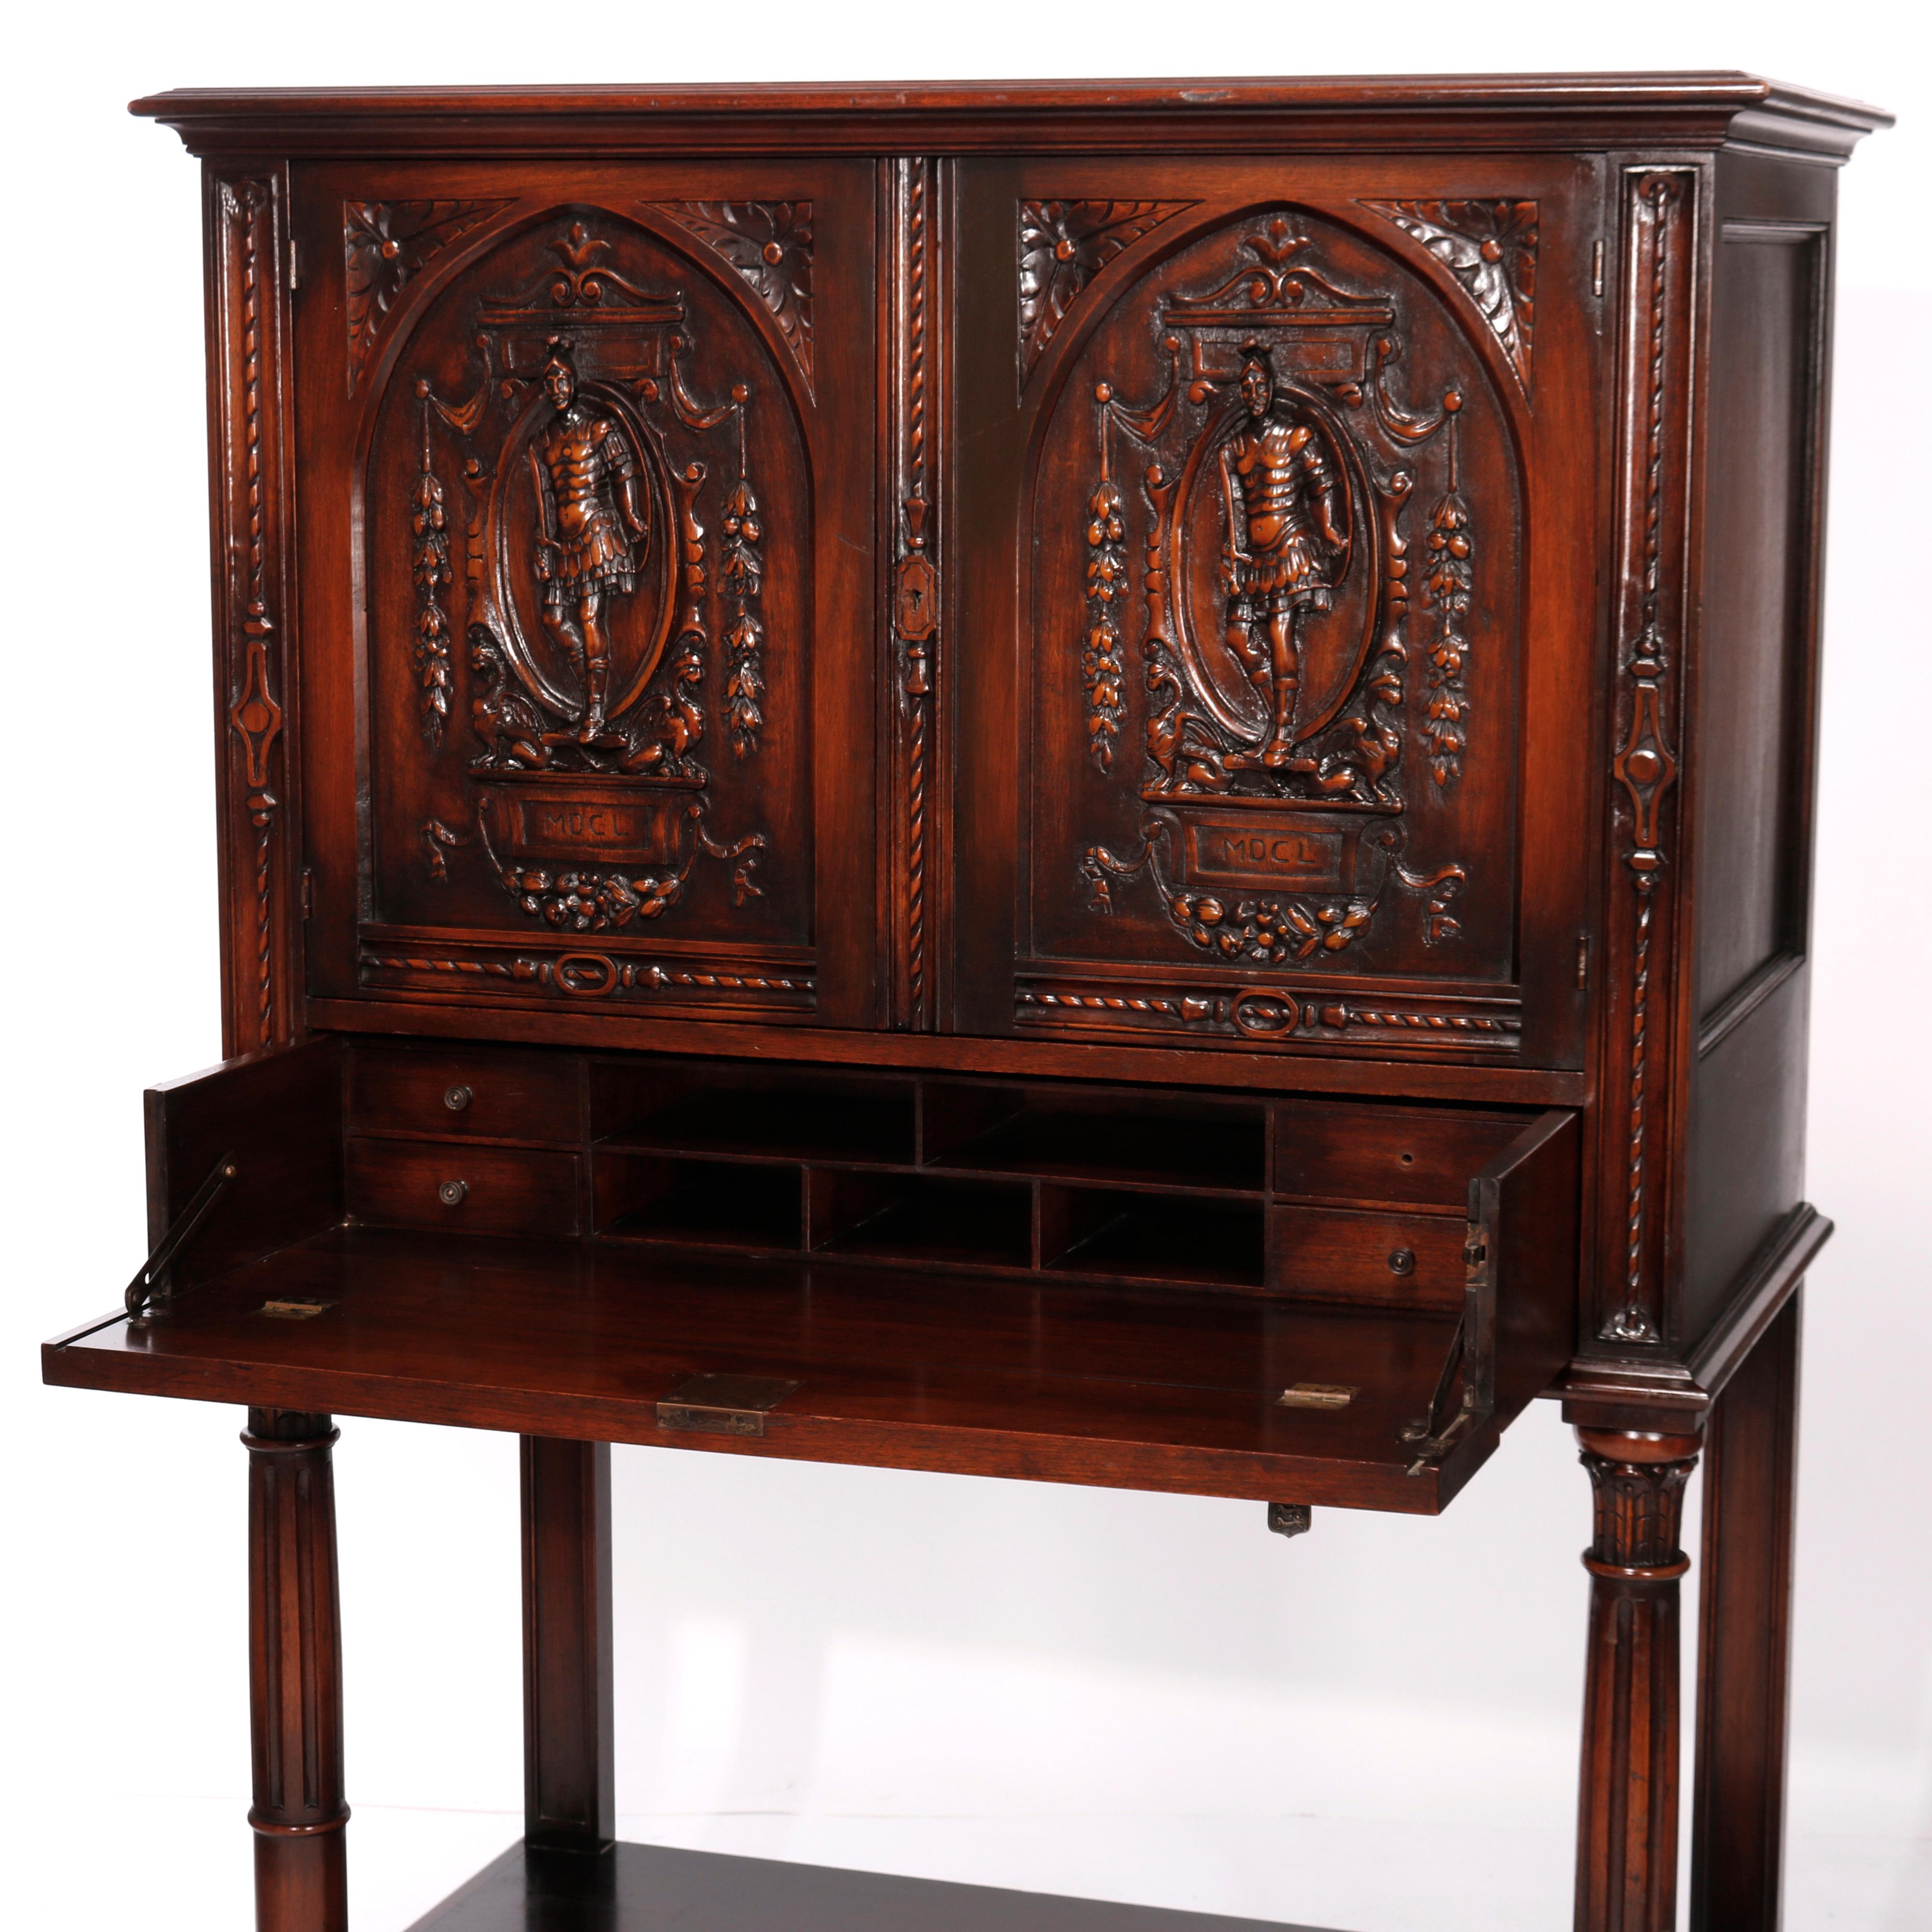 An antique Italian figural secretary credenza offers walnut construction with upper having double doors with figural carving in relief depicting soldiers or knights over lower drop down desk raised on turned legs with lower display, foliate carving